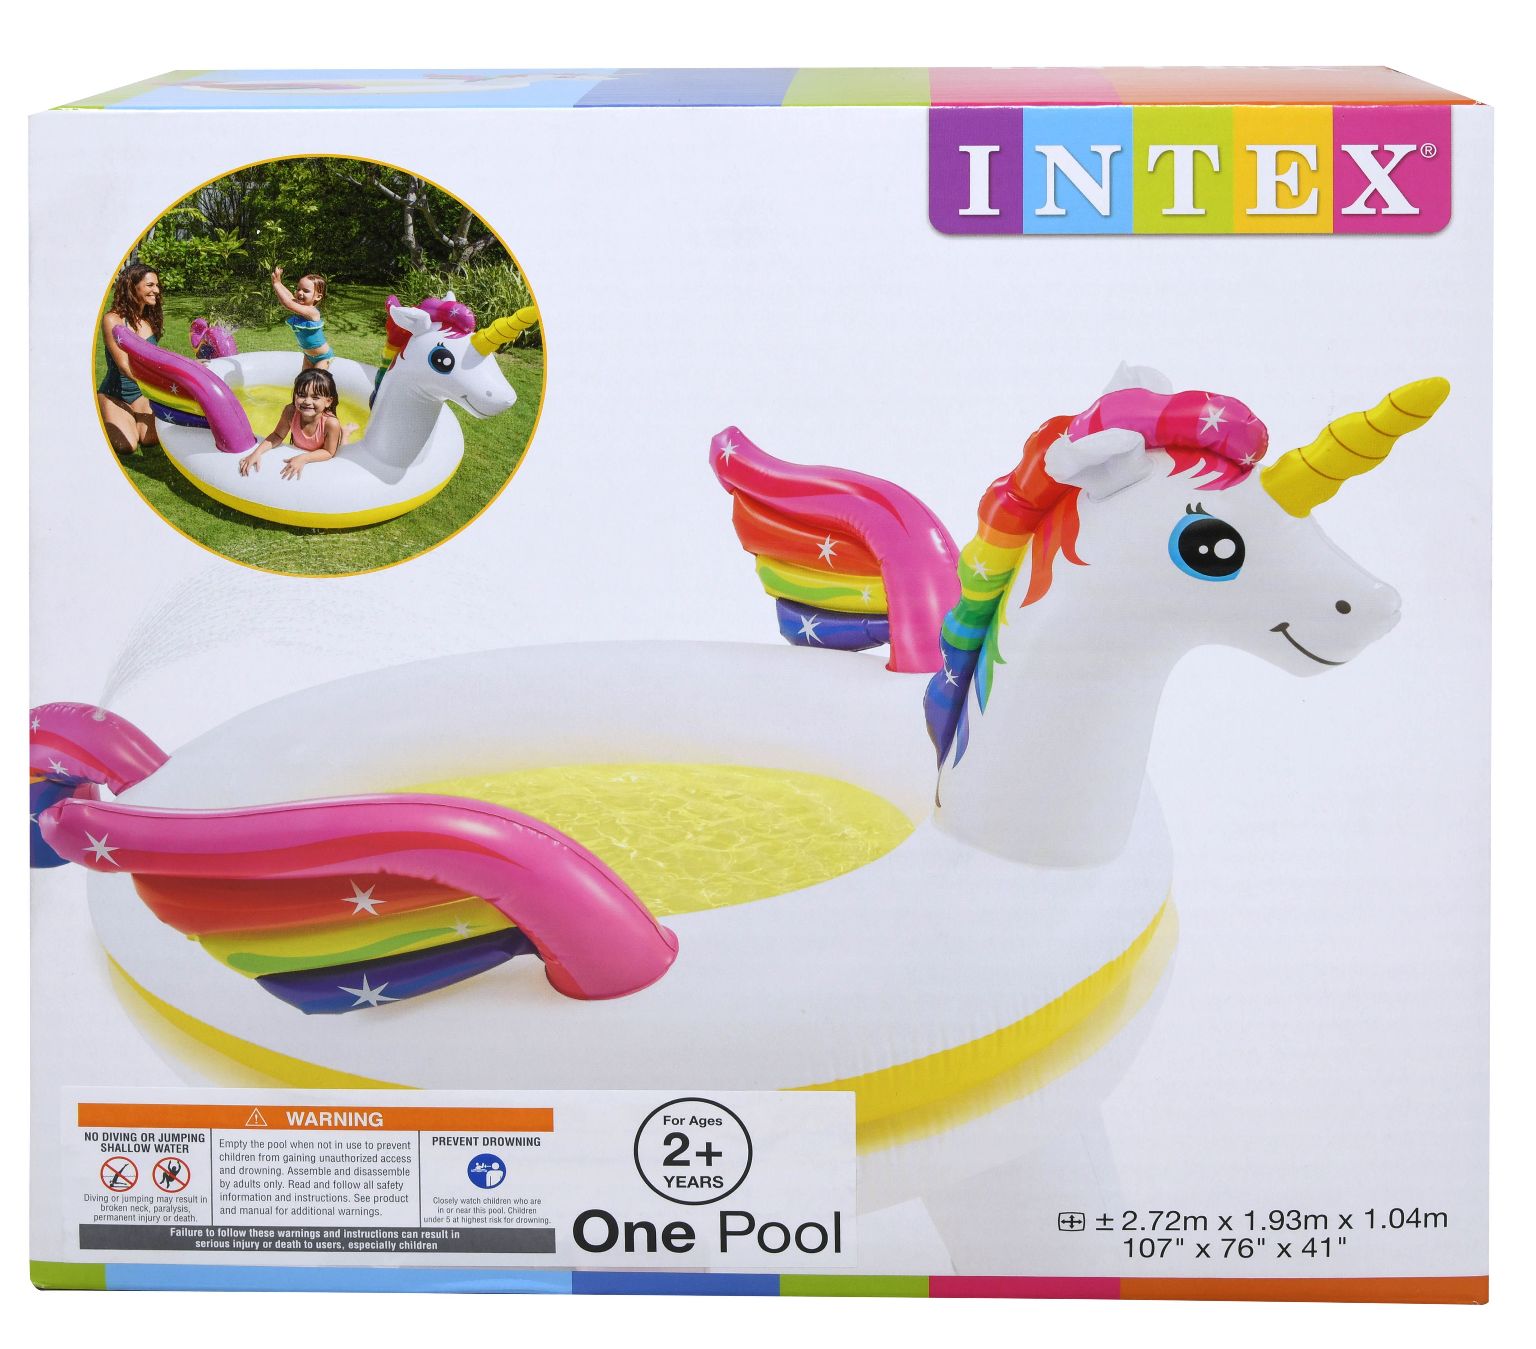 Intex Mystic Unicorn Inflatable Spray Pool 107" X 76" X 41" for Ages 2+ 